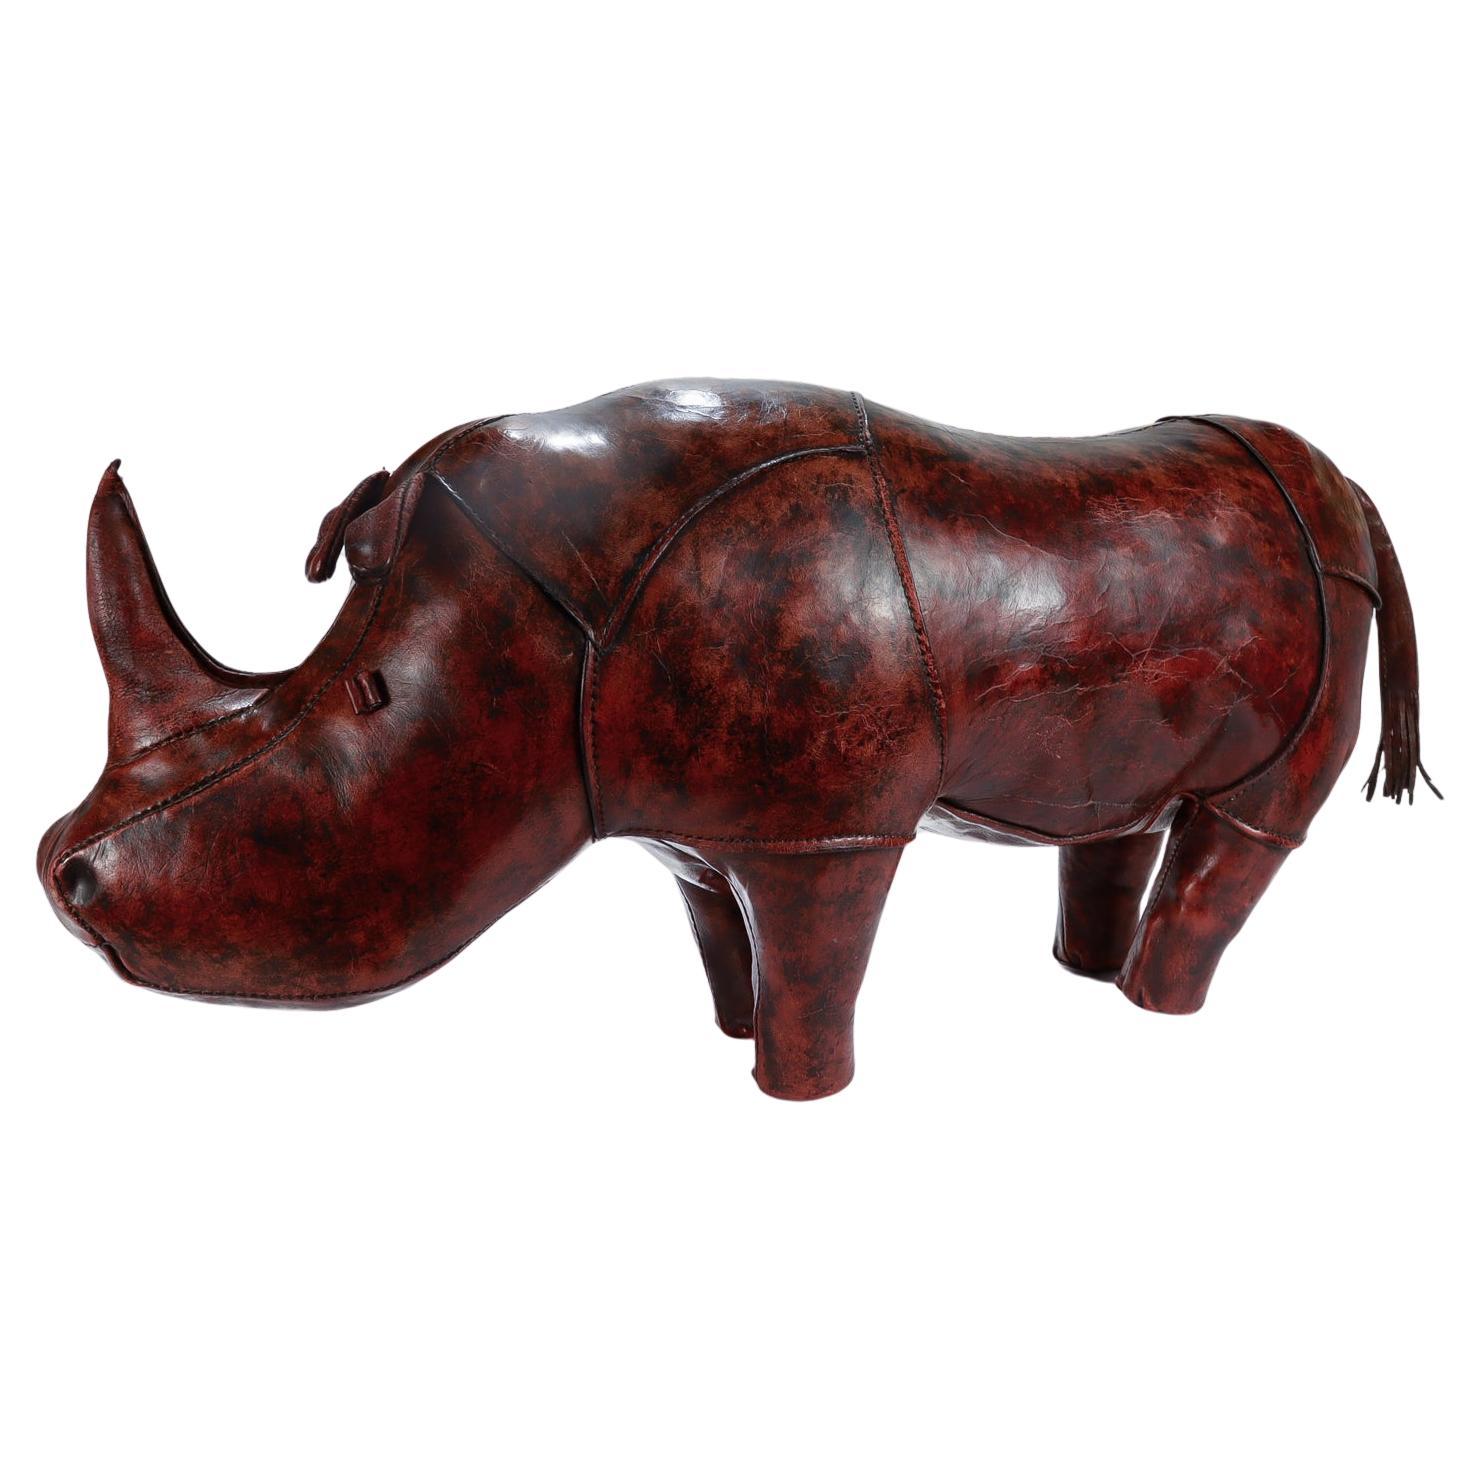 A fine vintage leather footstool.

Designed by Daniel Omersa for Abercrombie & Fitch in the 1960's.

In the form of a standing rhinoceros with its signature folded eyes, floppy ears, and button feet.

Having a wonderfully aged finish with wear in